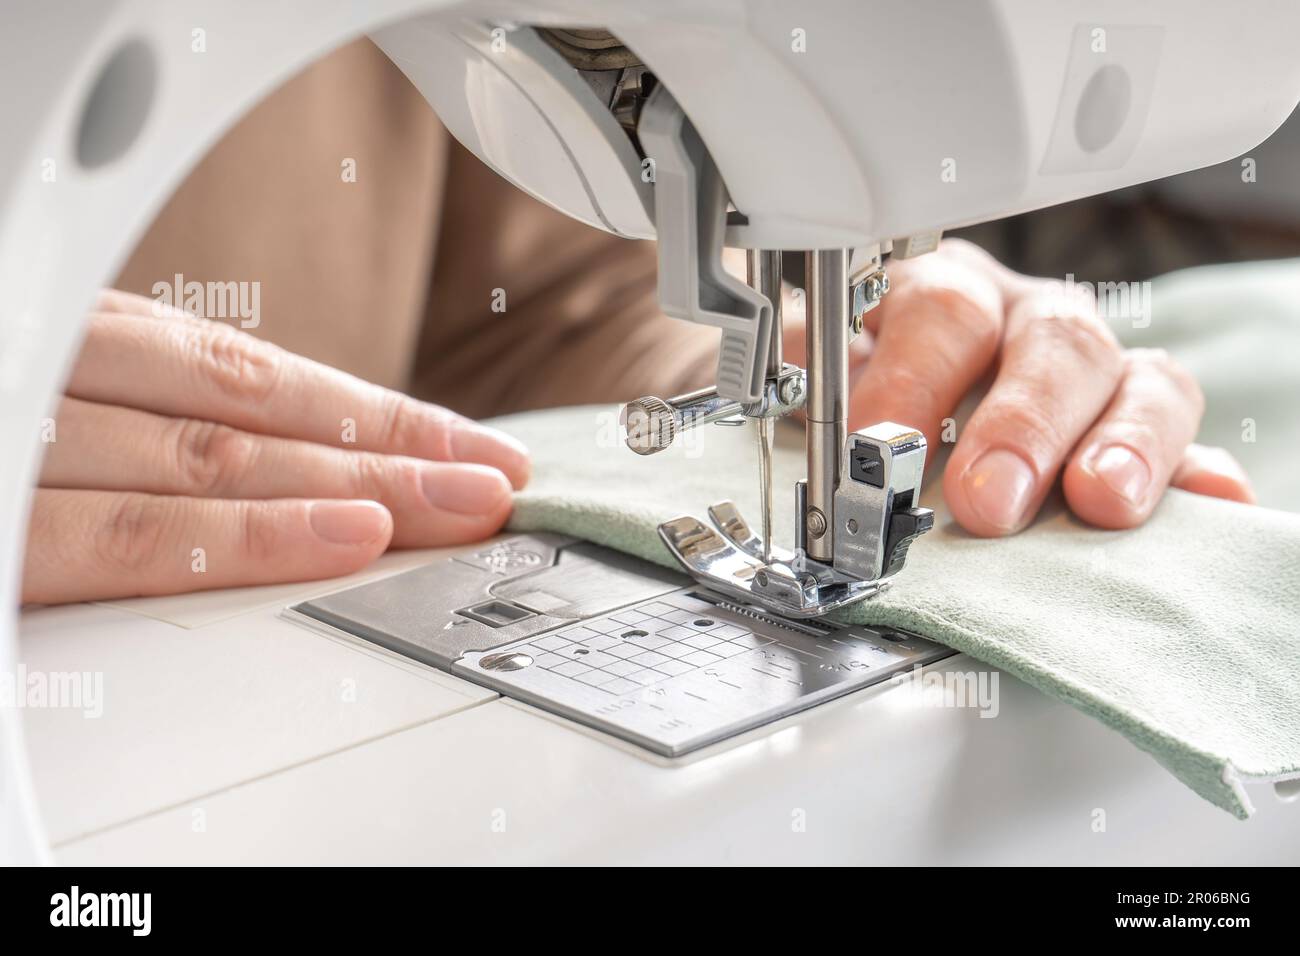 Female hands stitching white fabric on modern sewing machine at workplace in atelier. Women's hands sew pieces of fabric on a sewing machine close-up. Stock Photo